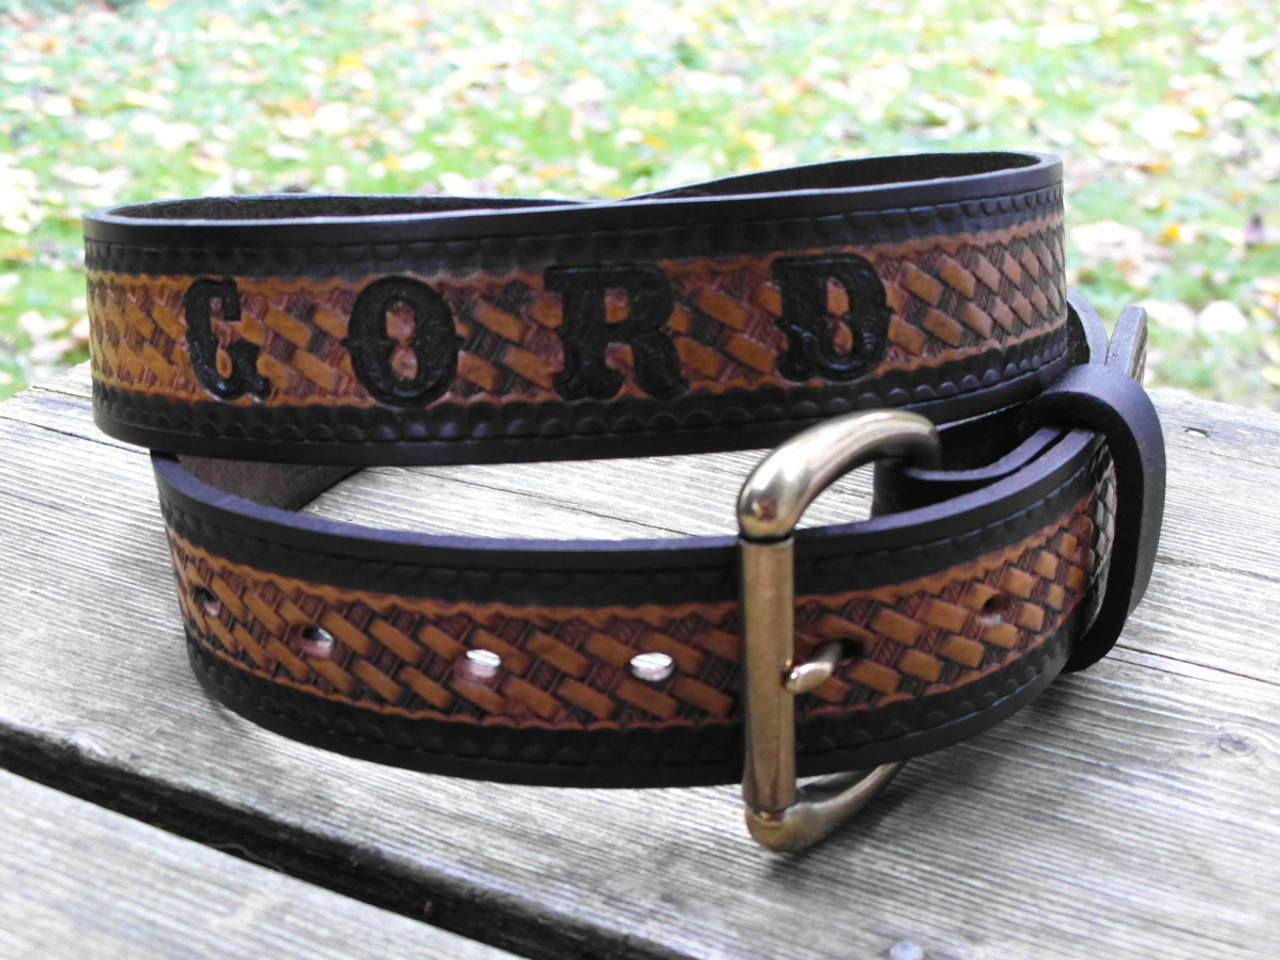 Custom Leather Belt with Your Name/Text